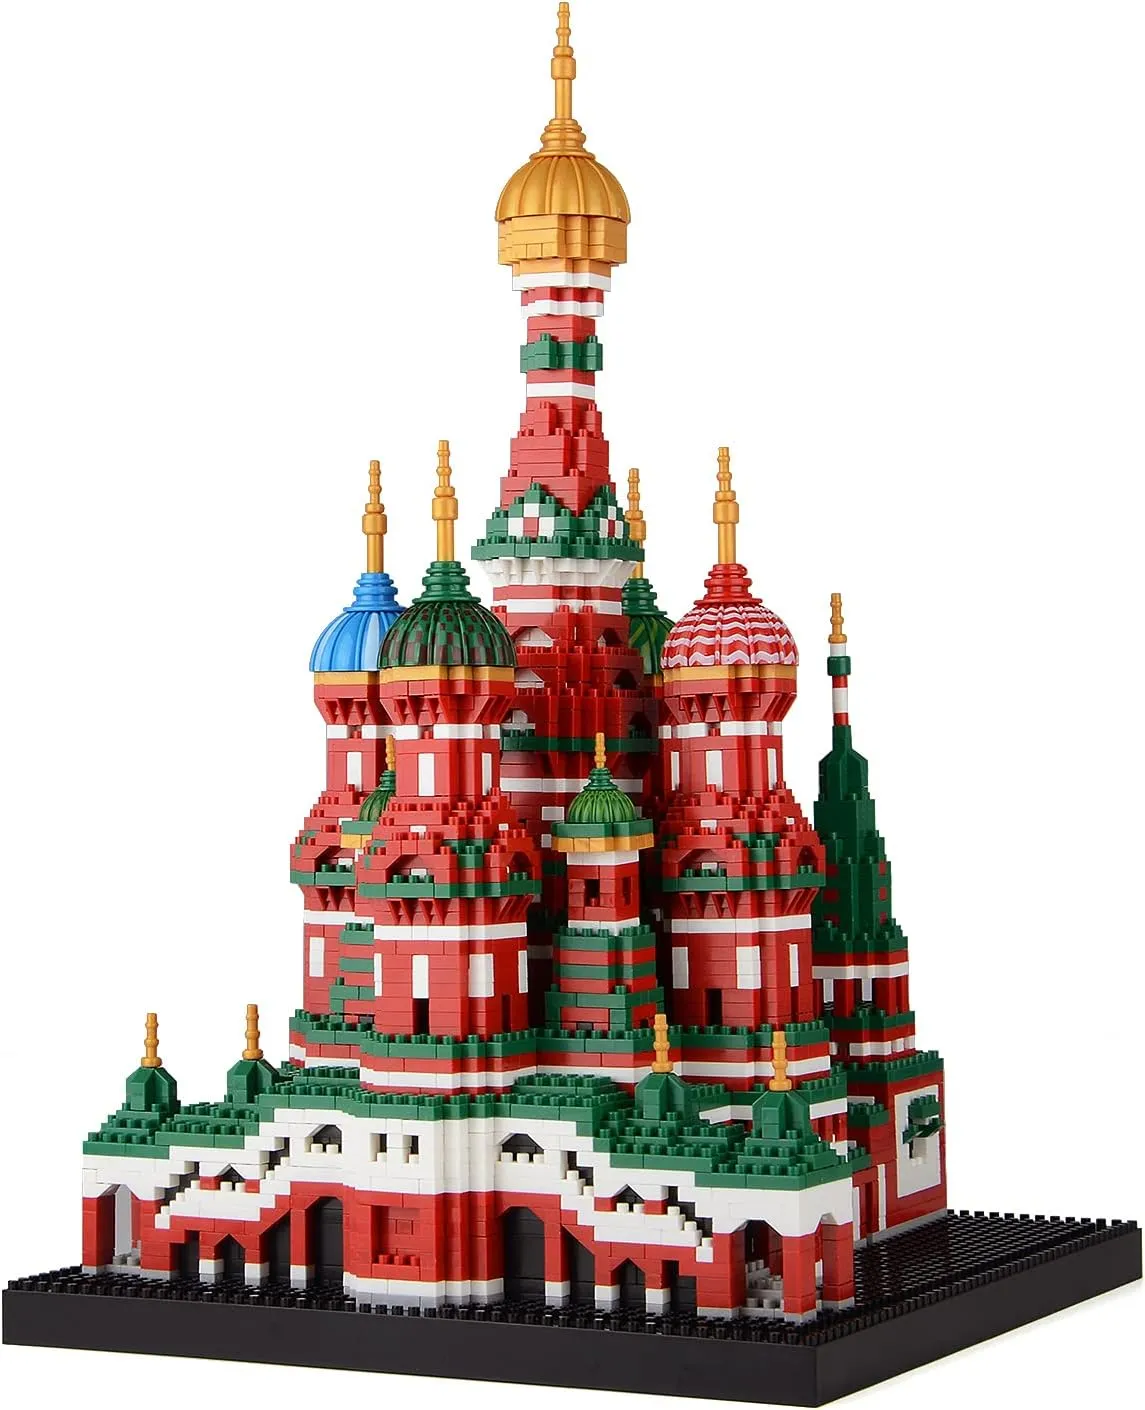 St. Basil's Cathedral, world-famous building block set, educational toys, gifts for adults and children (4,300 pieces)